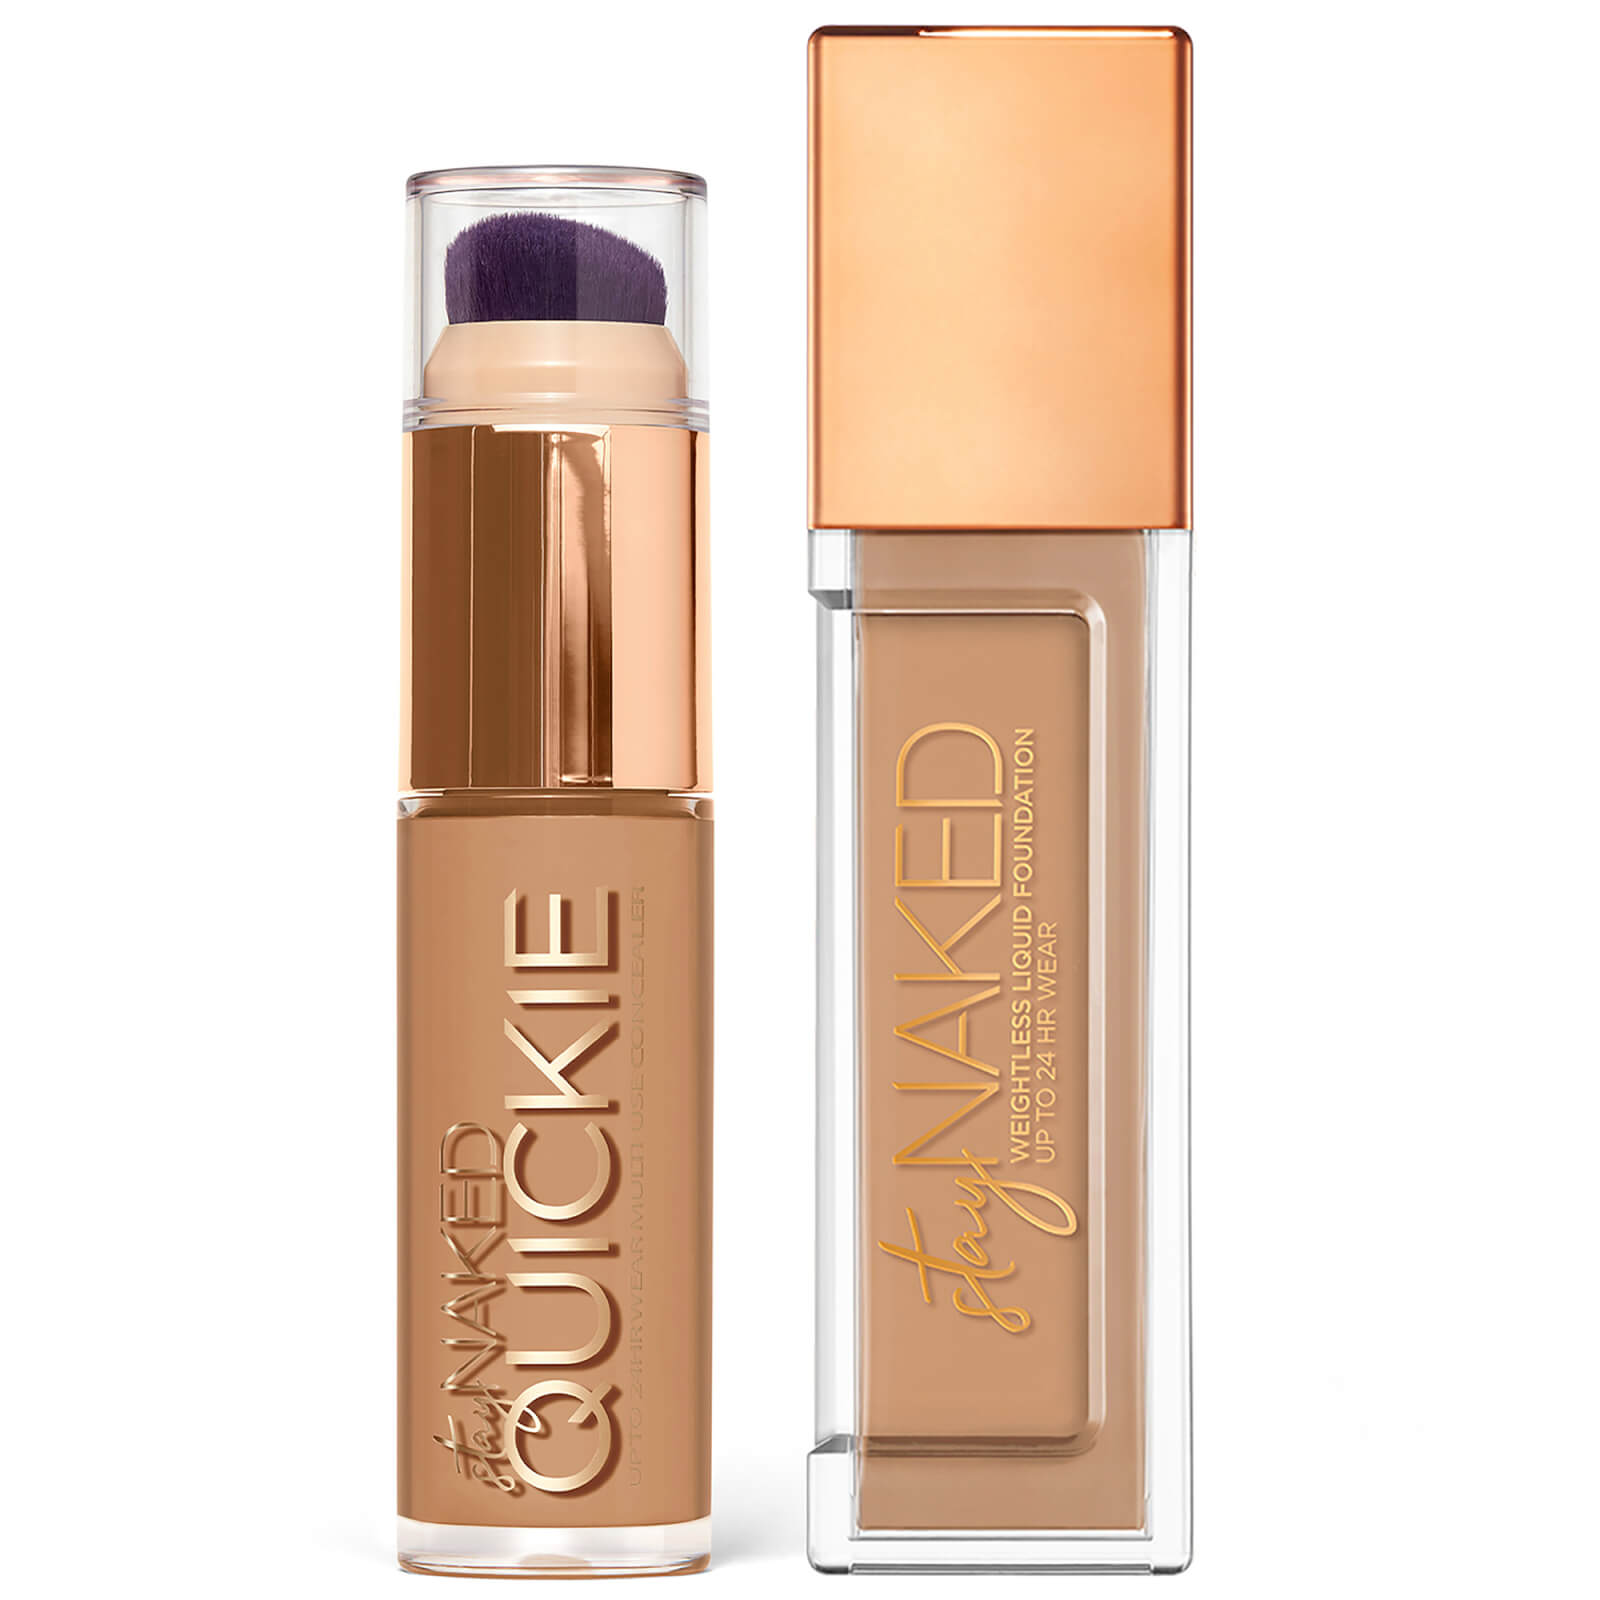 Urban Decay Stay Naked Quickie Concealer 16.4ml (various Shades) - 30cp